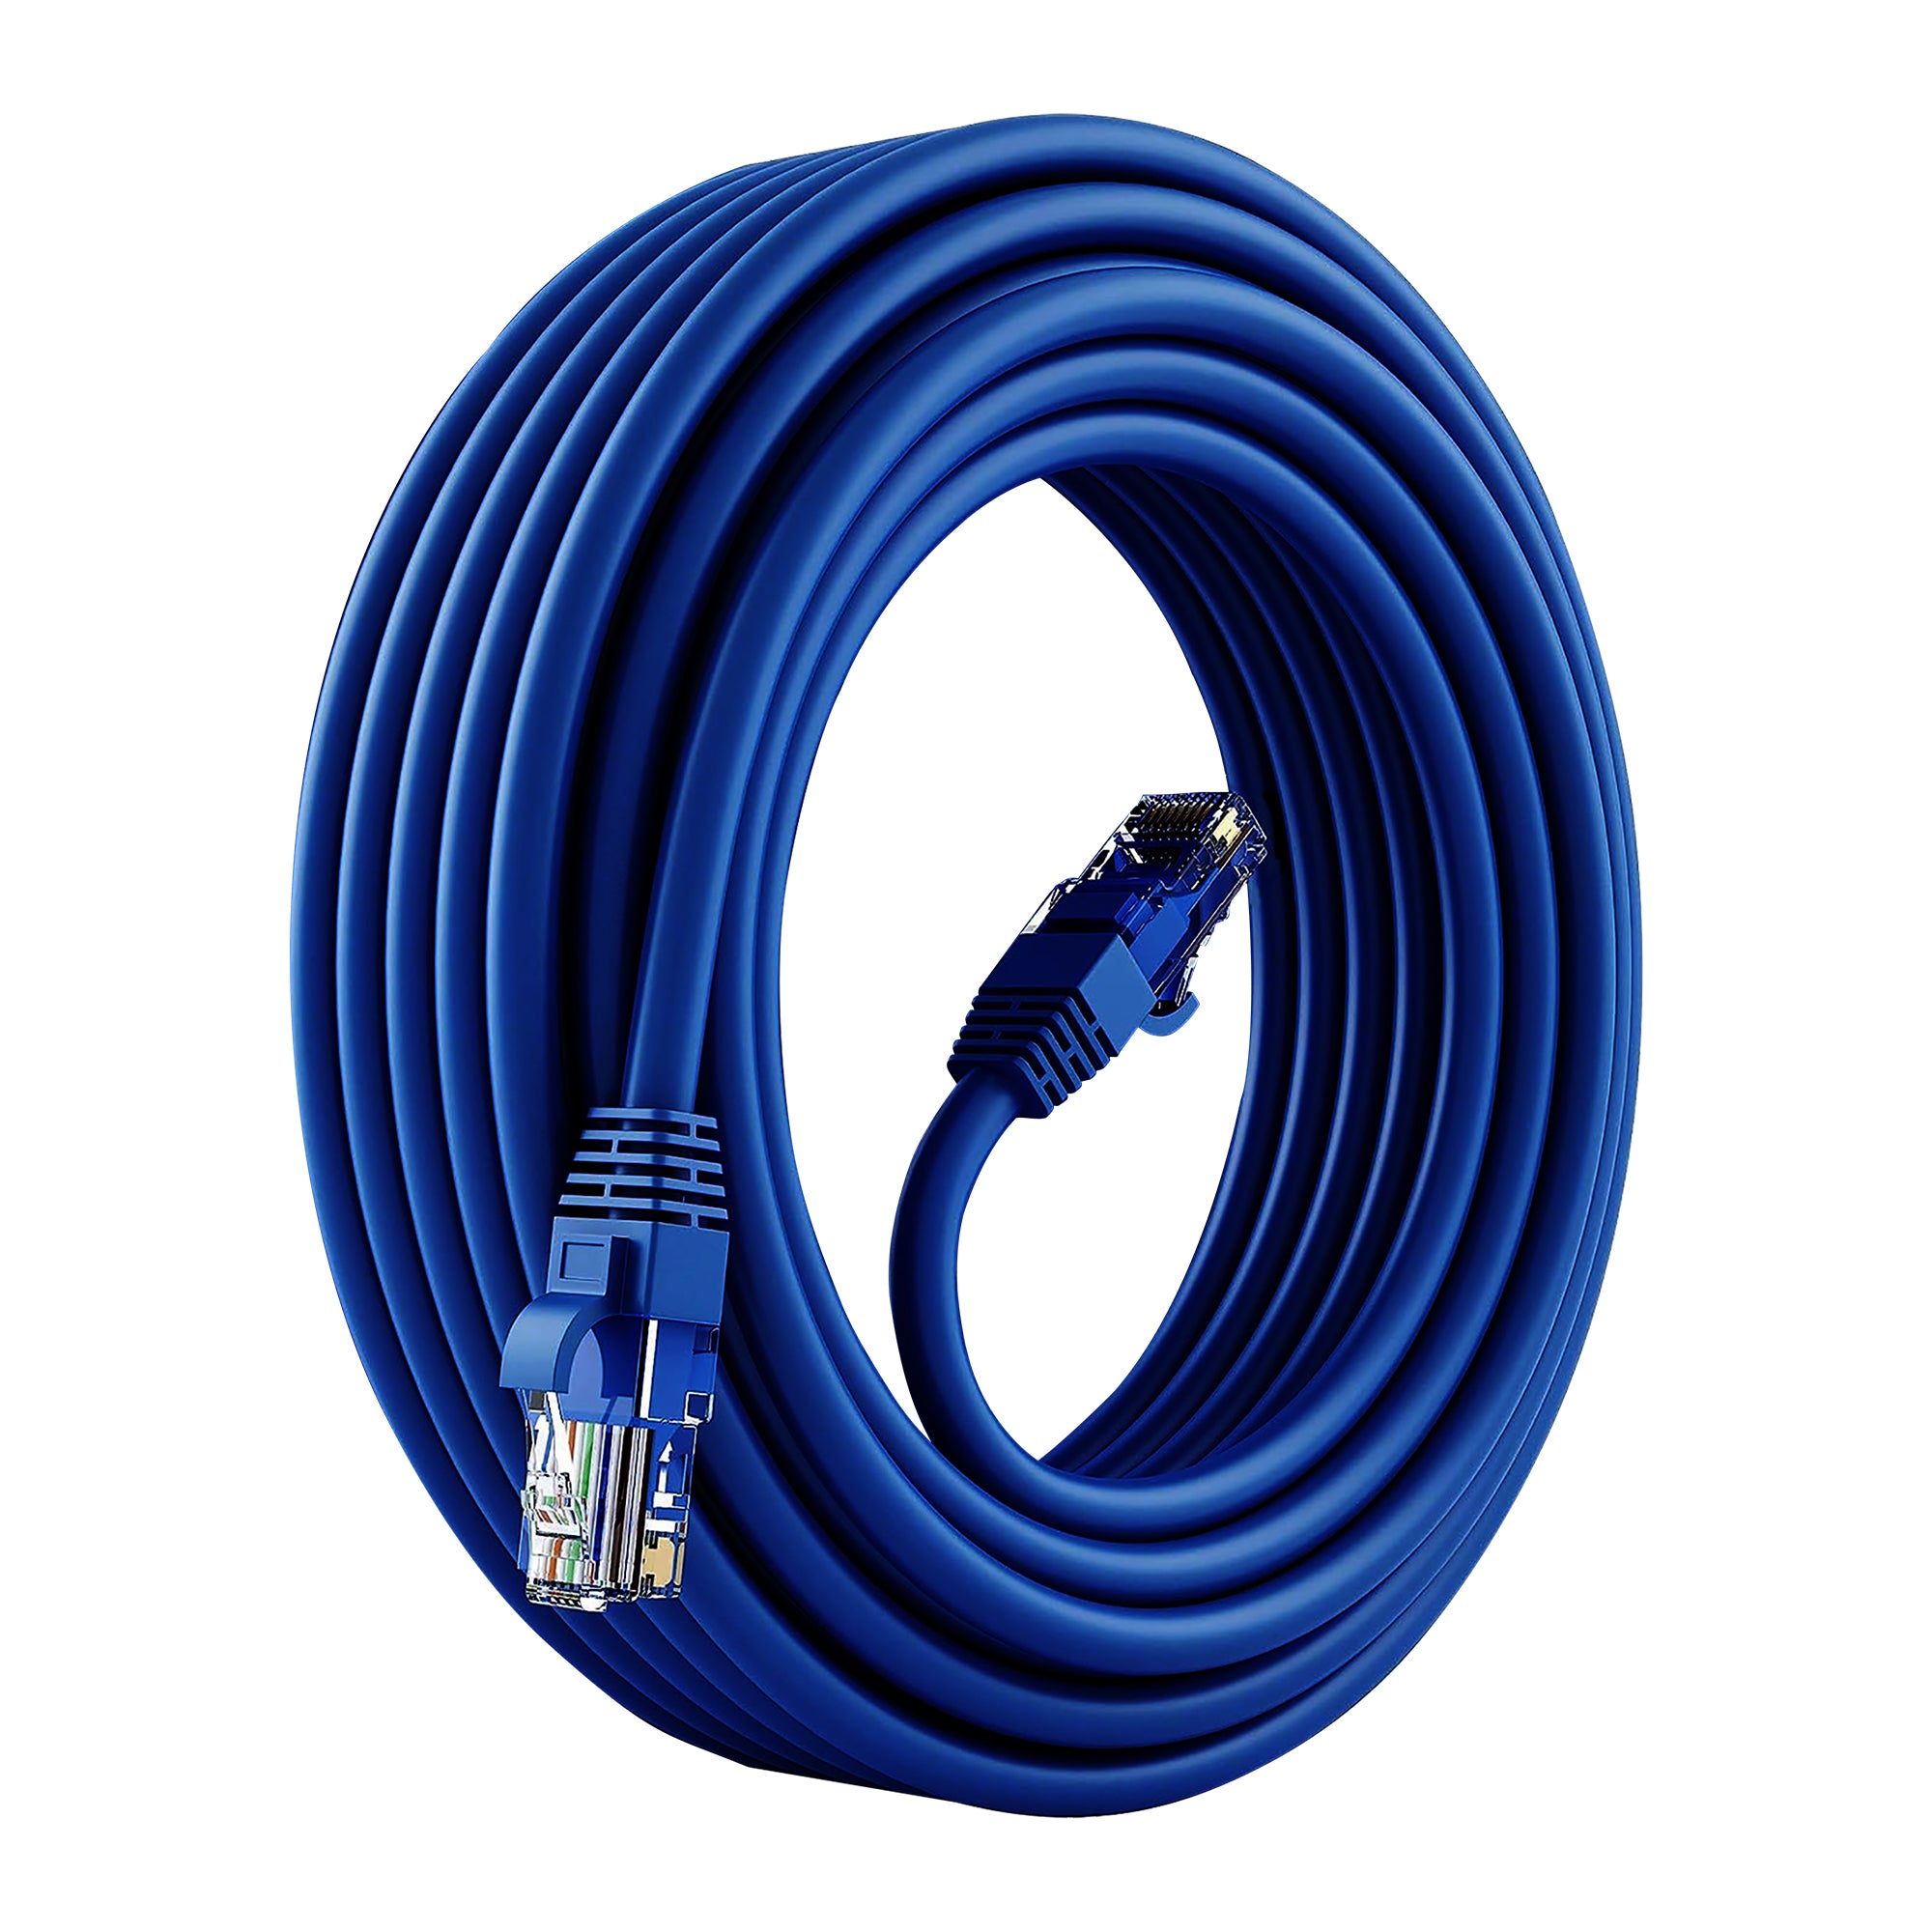 Cabo Ethernet Cat 6 Flat Cable, Cat 6 Ethernet Cable Angola